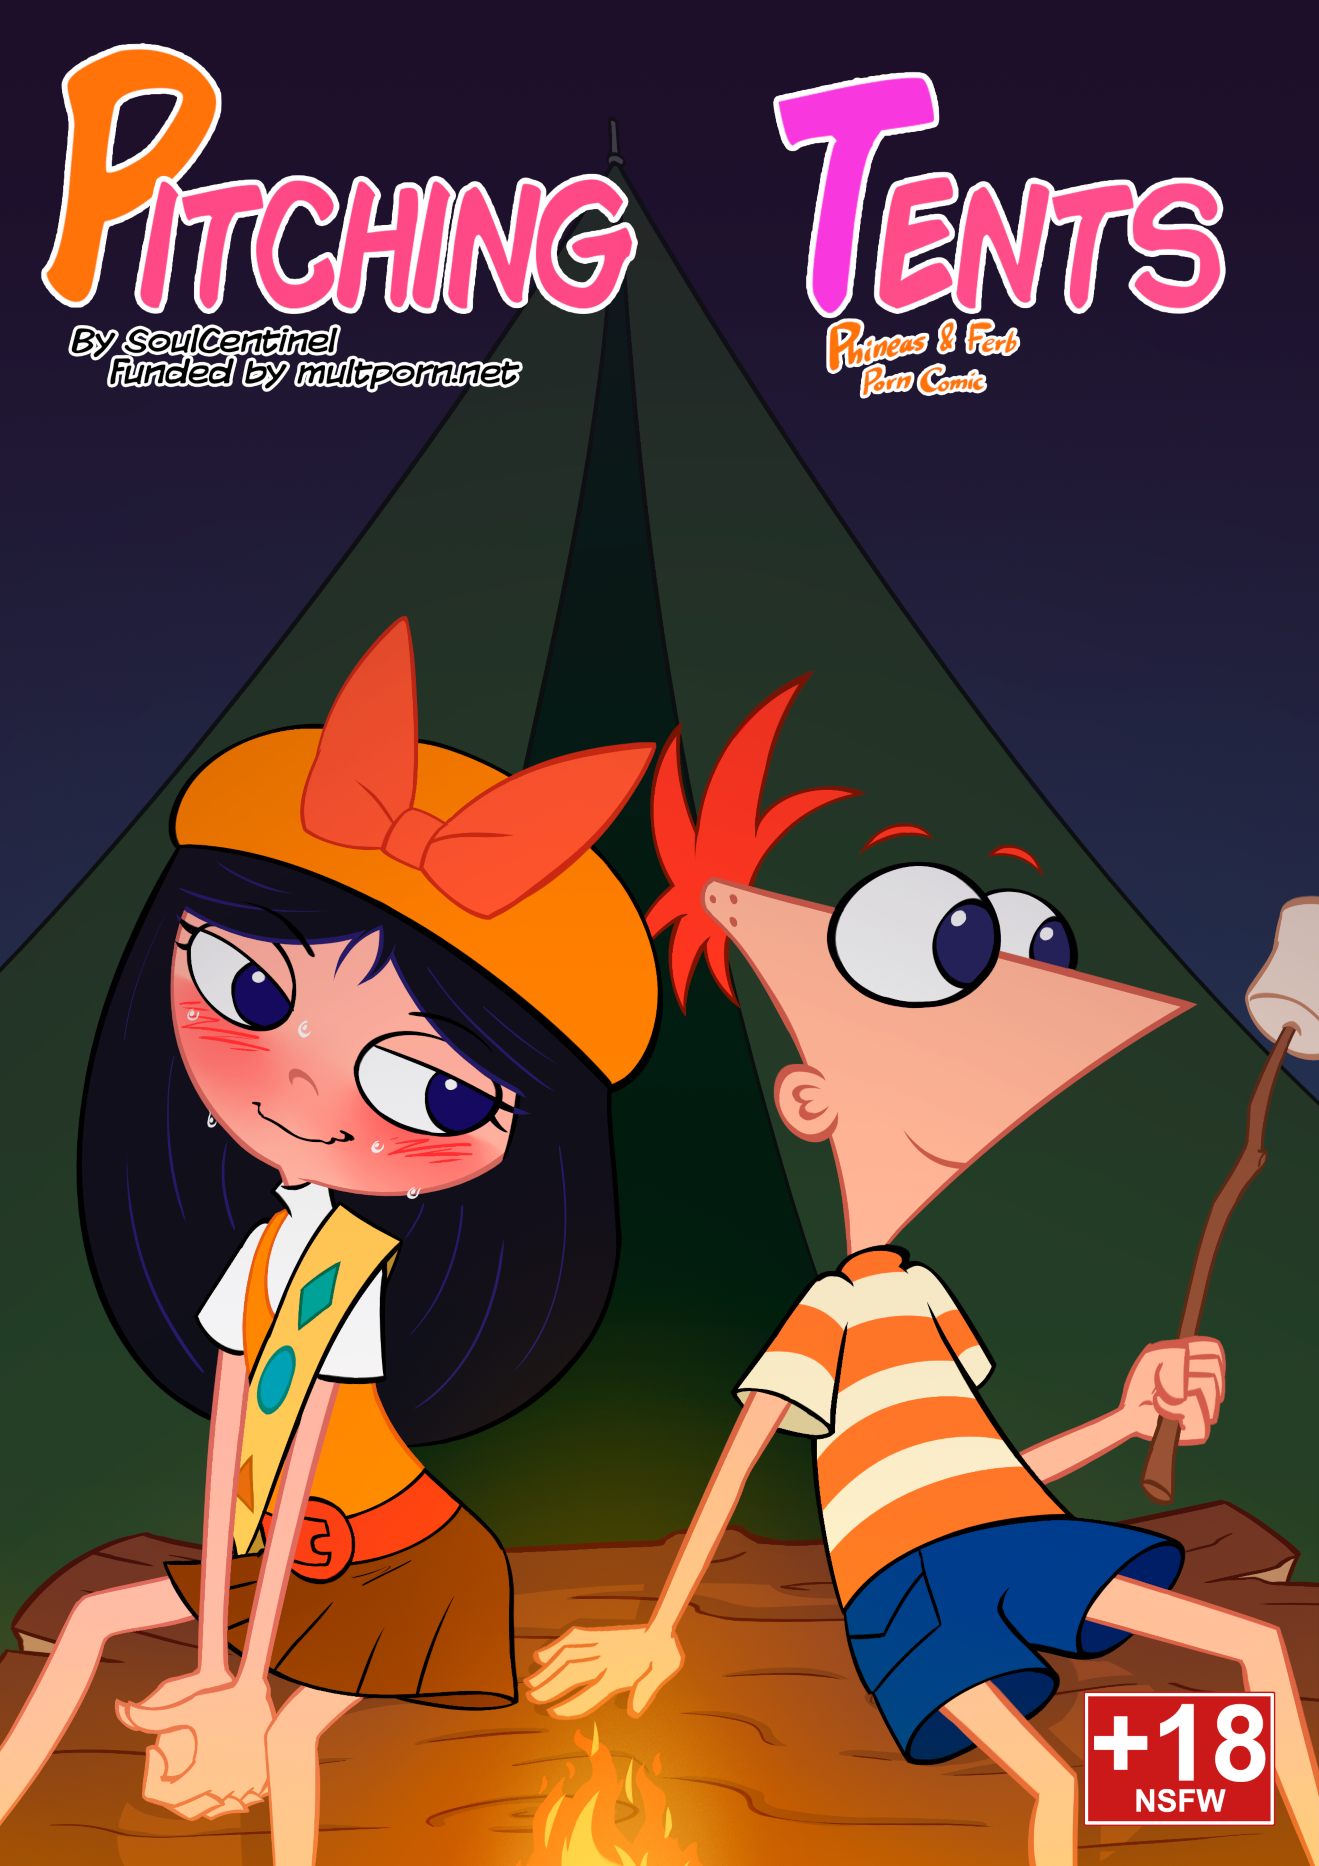 Phineas And Ferb Milf Porn - Pitching Tents - Phineas and Ferb [SoulCentinel] - FreeAdultComix